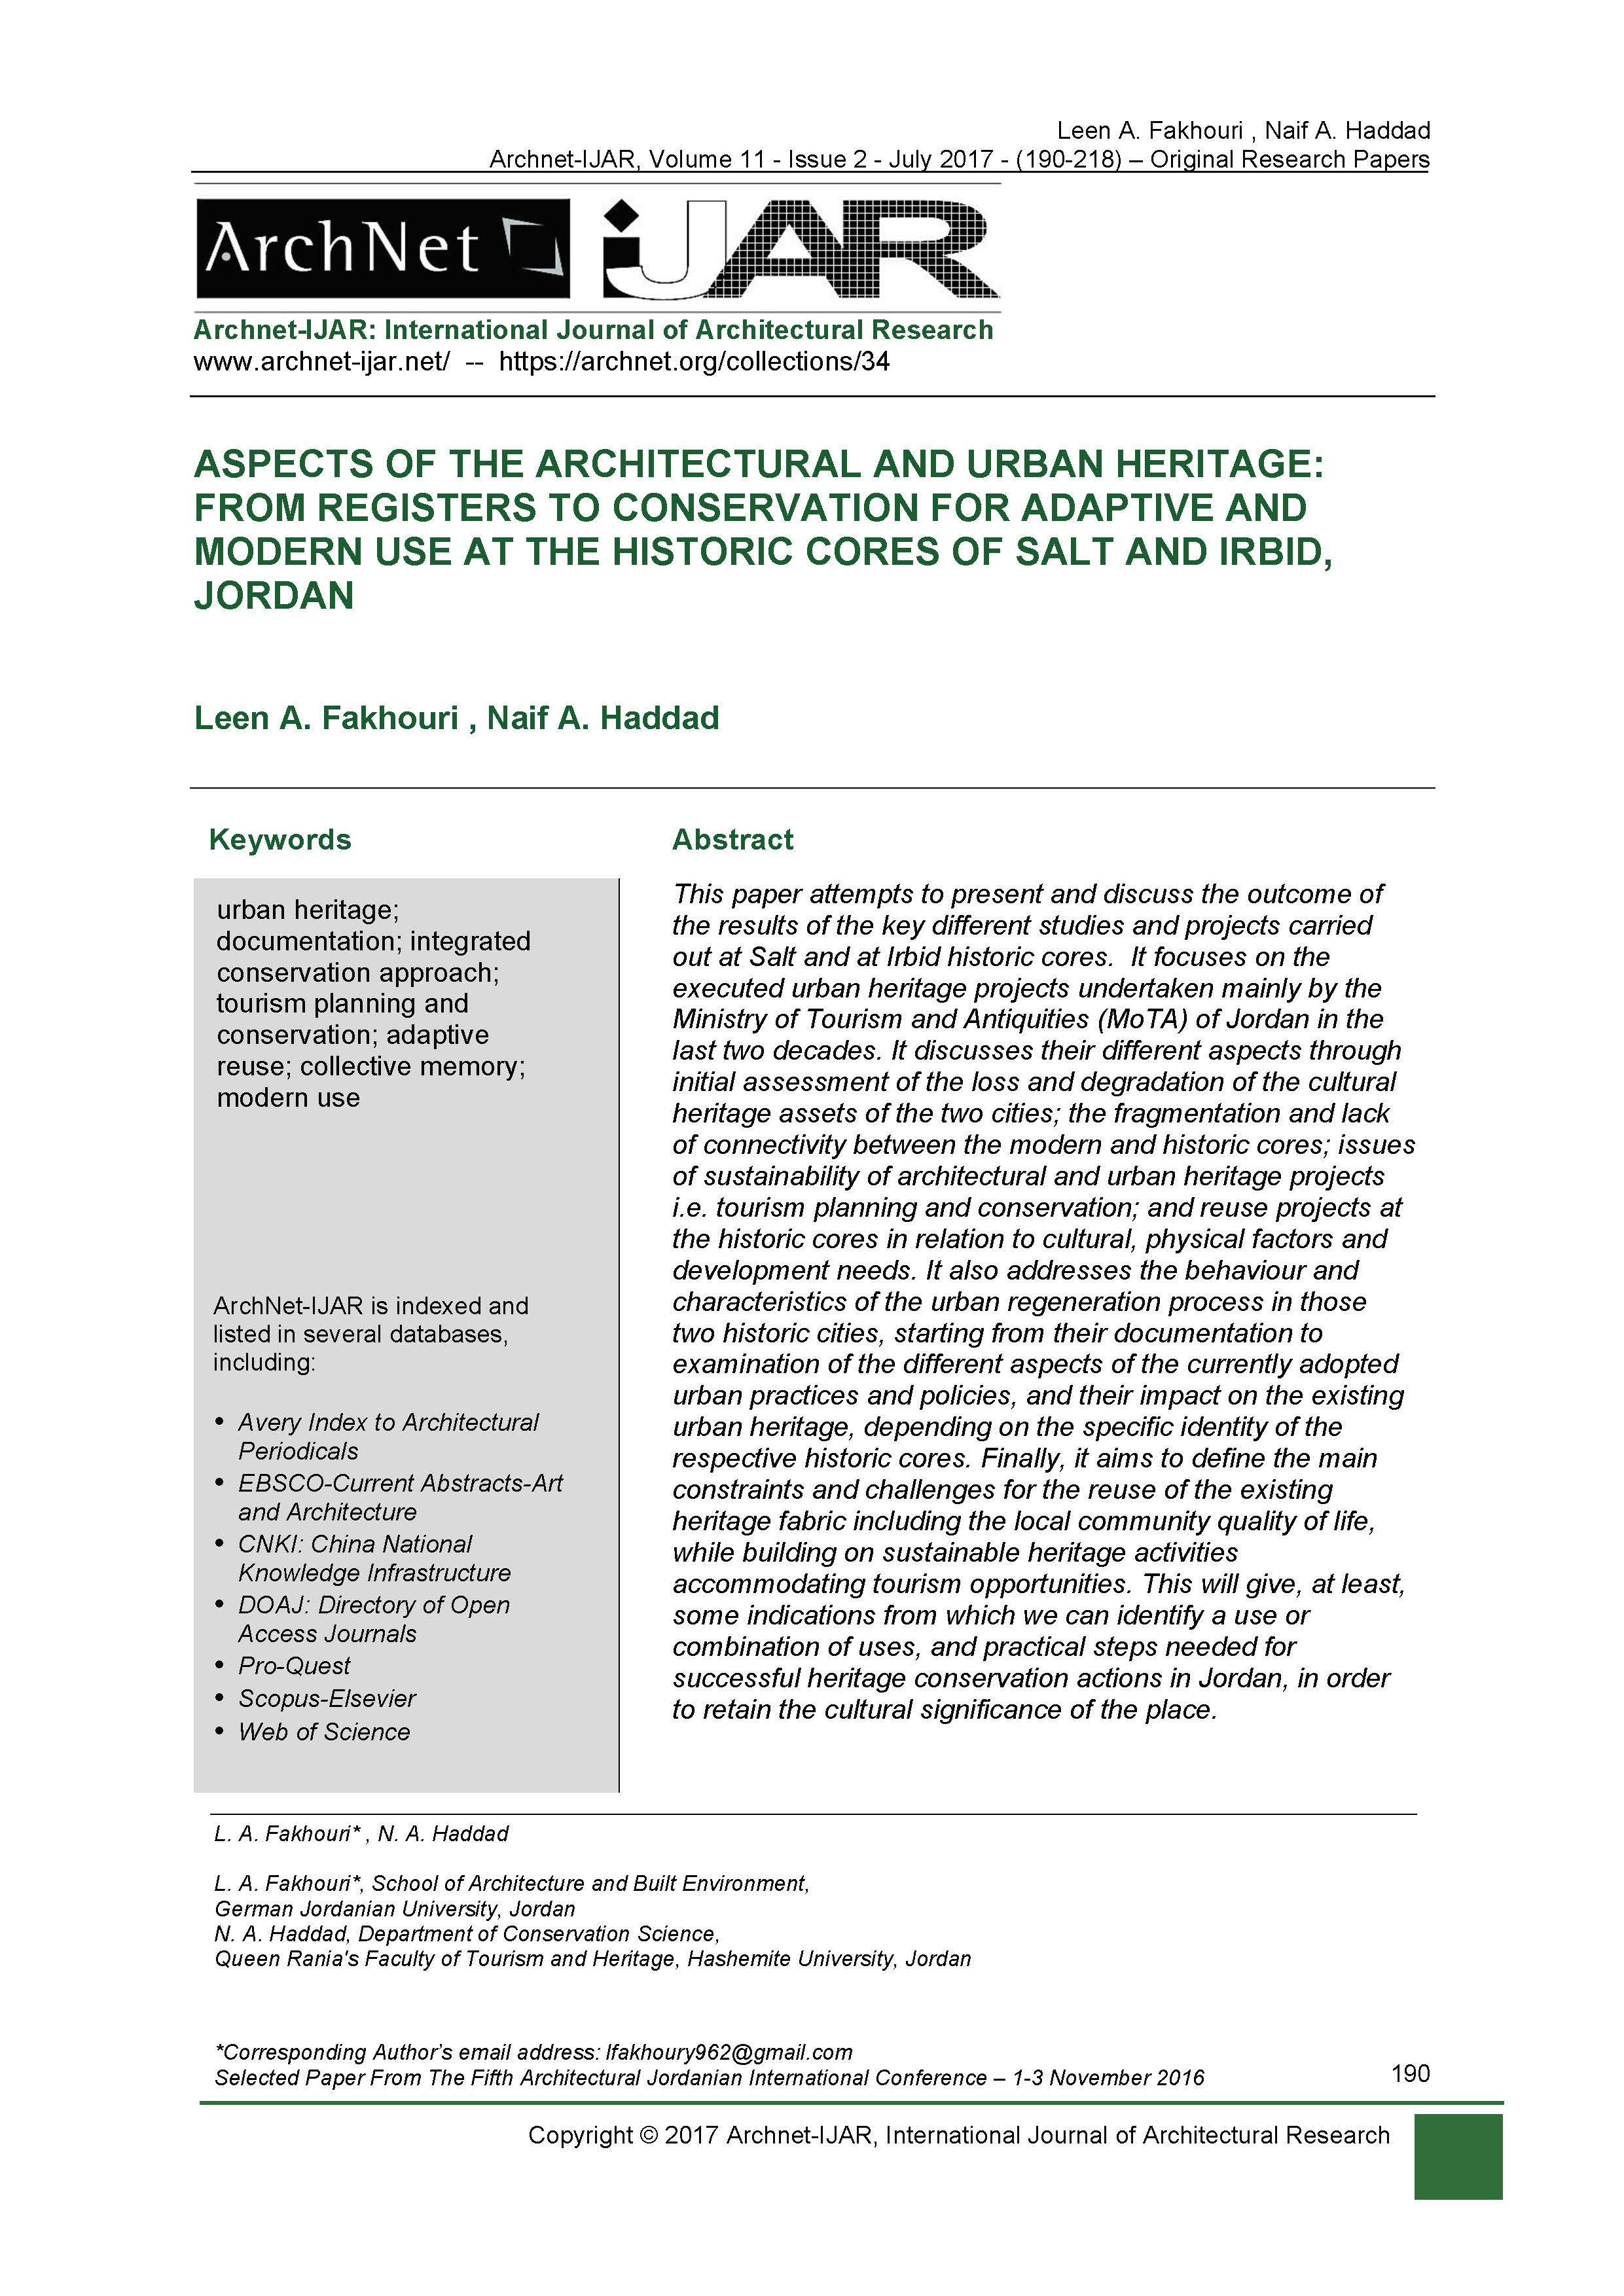 Aspects of the Architectural and Urban Heritage: From Registers to Conservation for Adaptive and Modern Use at the Historic Cores of Salt and Irbid, Jordan